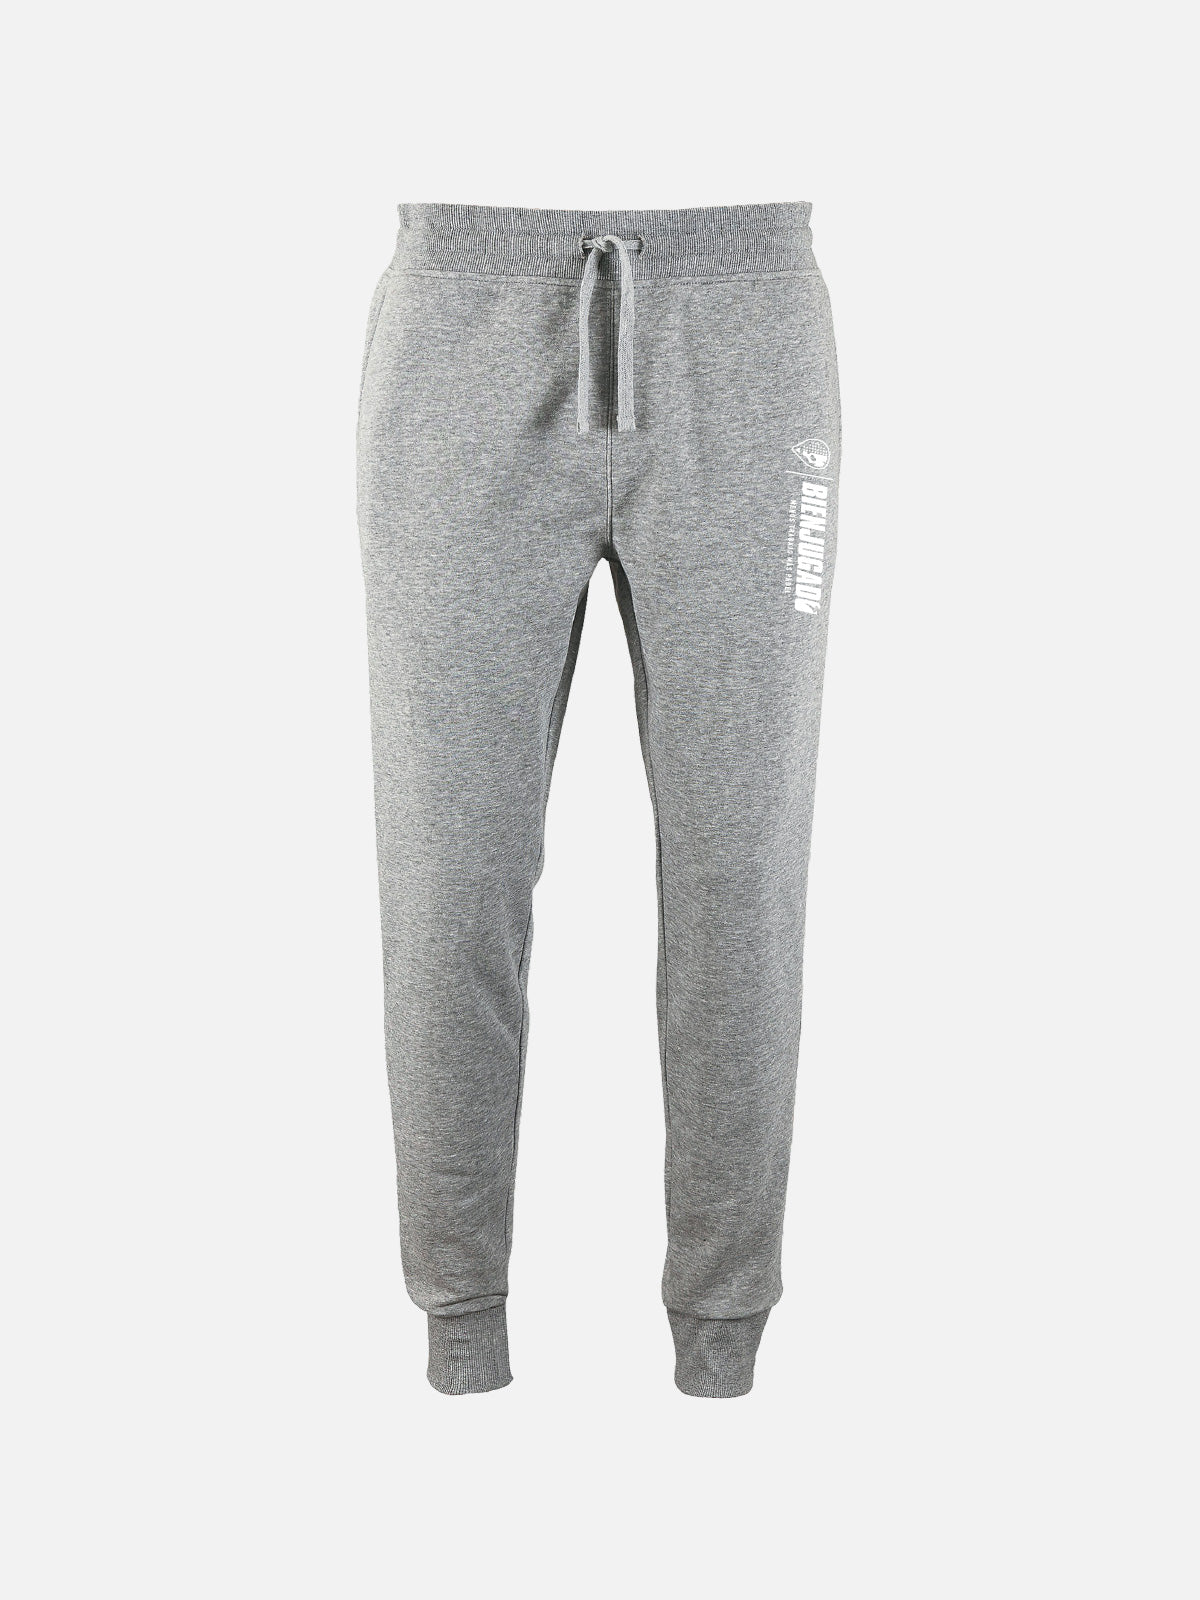 Iconic Women'S Trousers - Grey